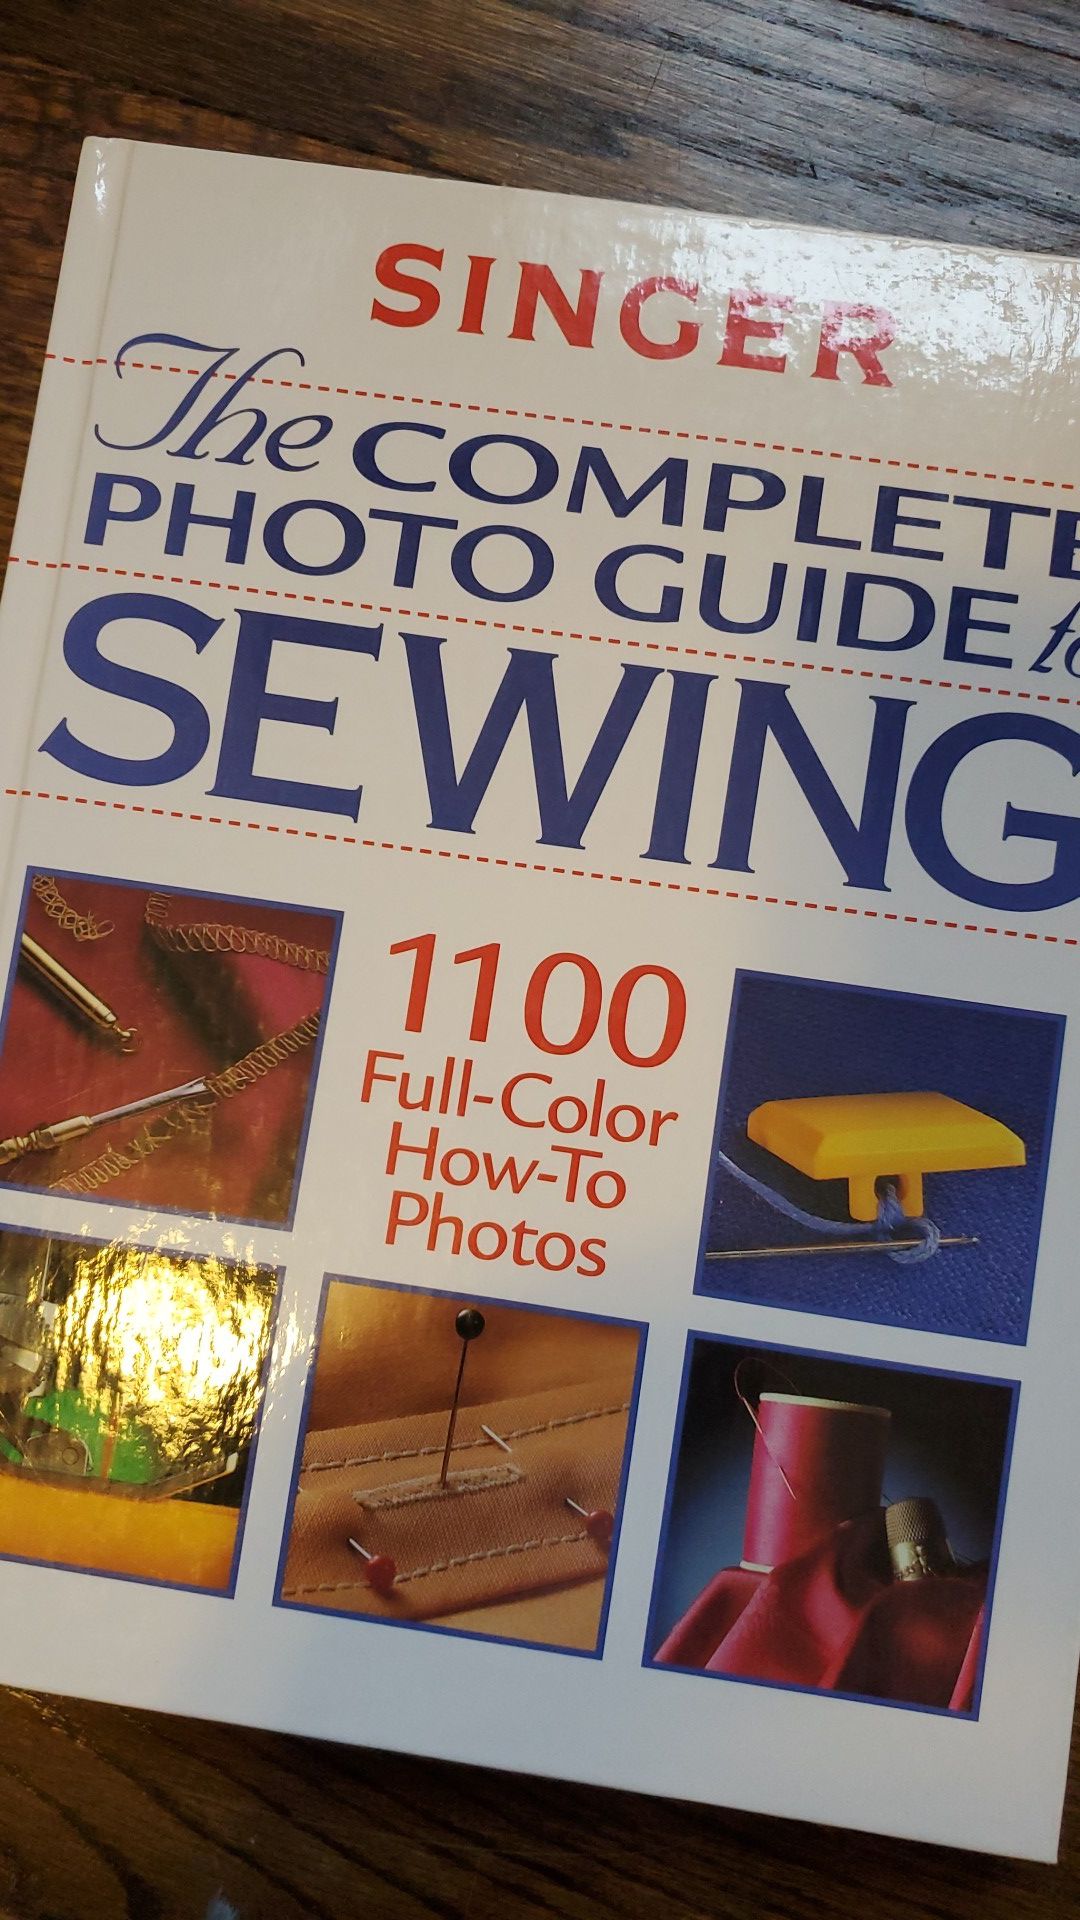 1999 Singer The Complete Photo Guide To Sewing Singer Sewing Guide Book Sewing Books Vintage Books Collectible Books Craft Books How-To Sew